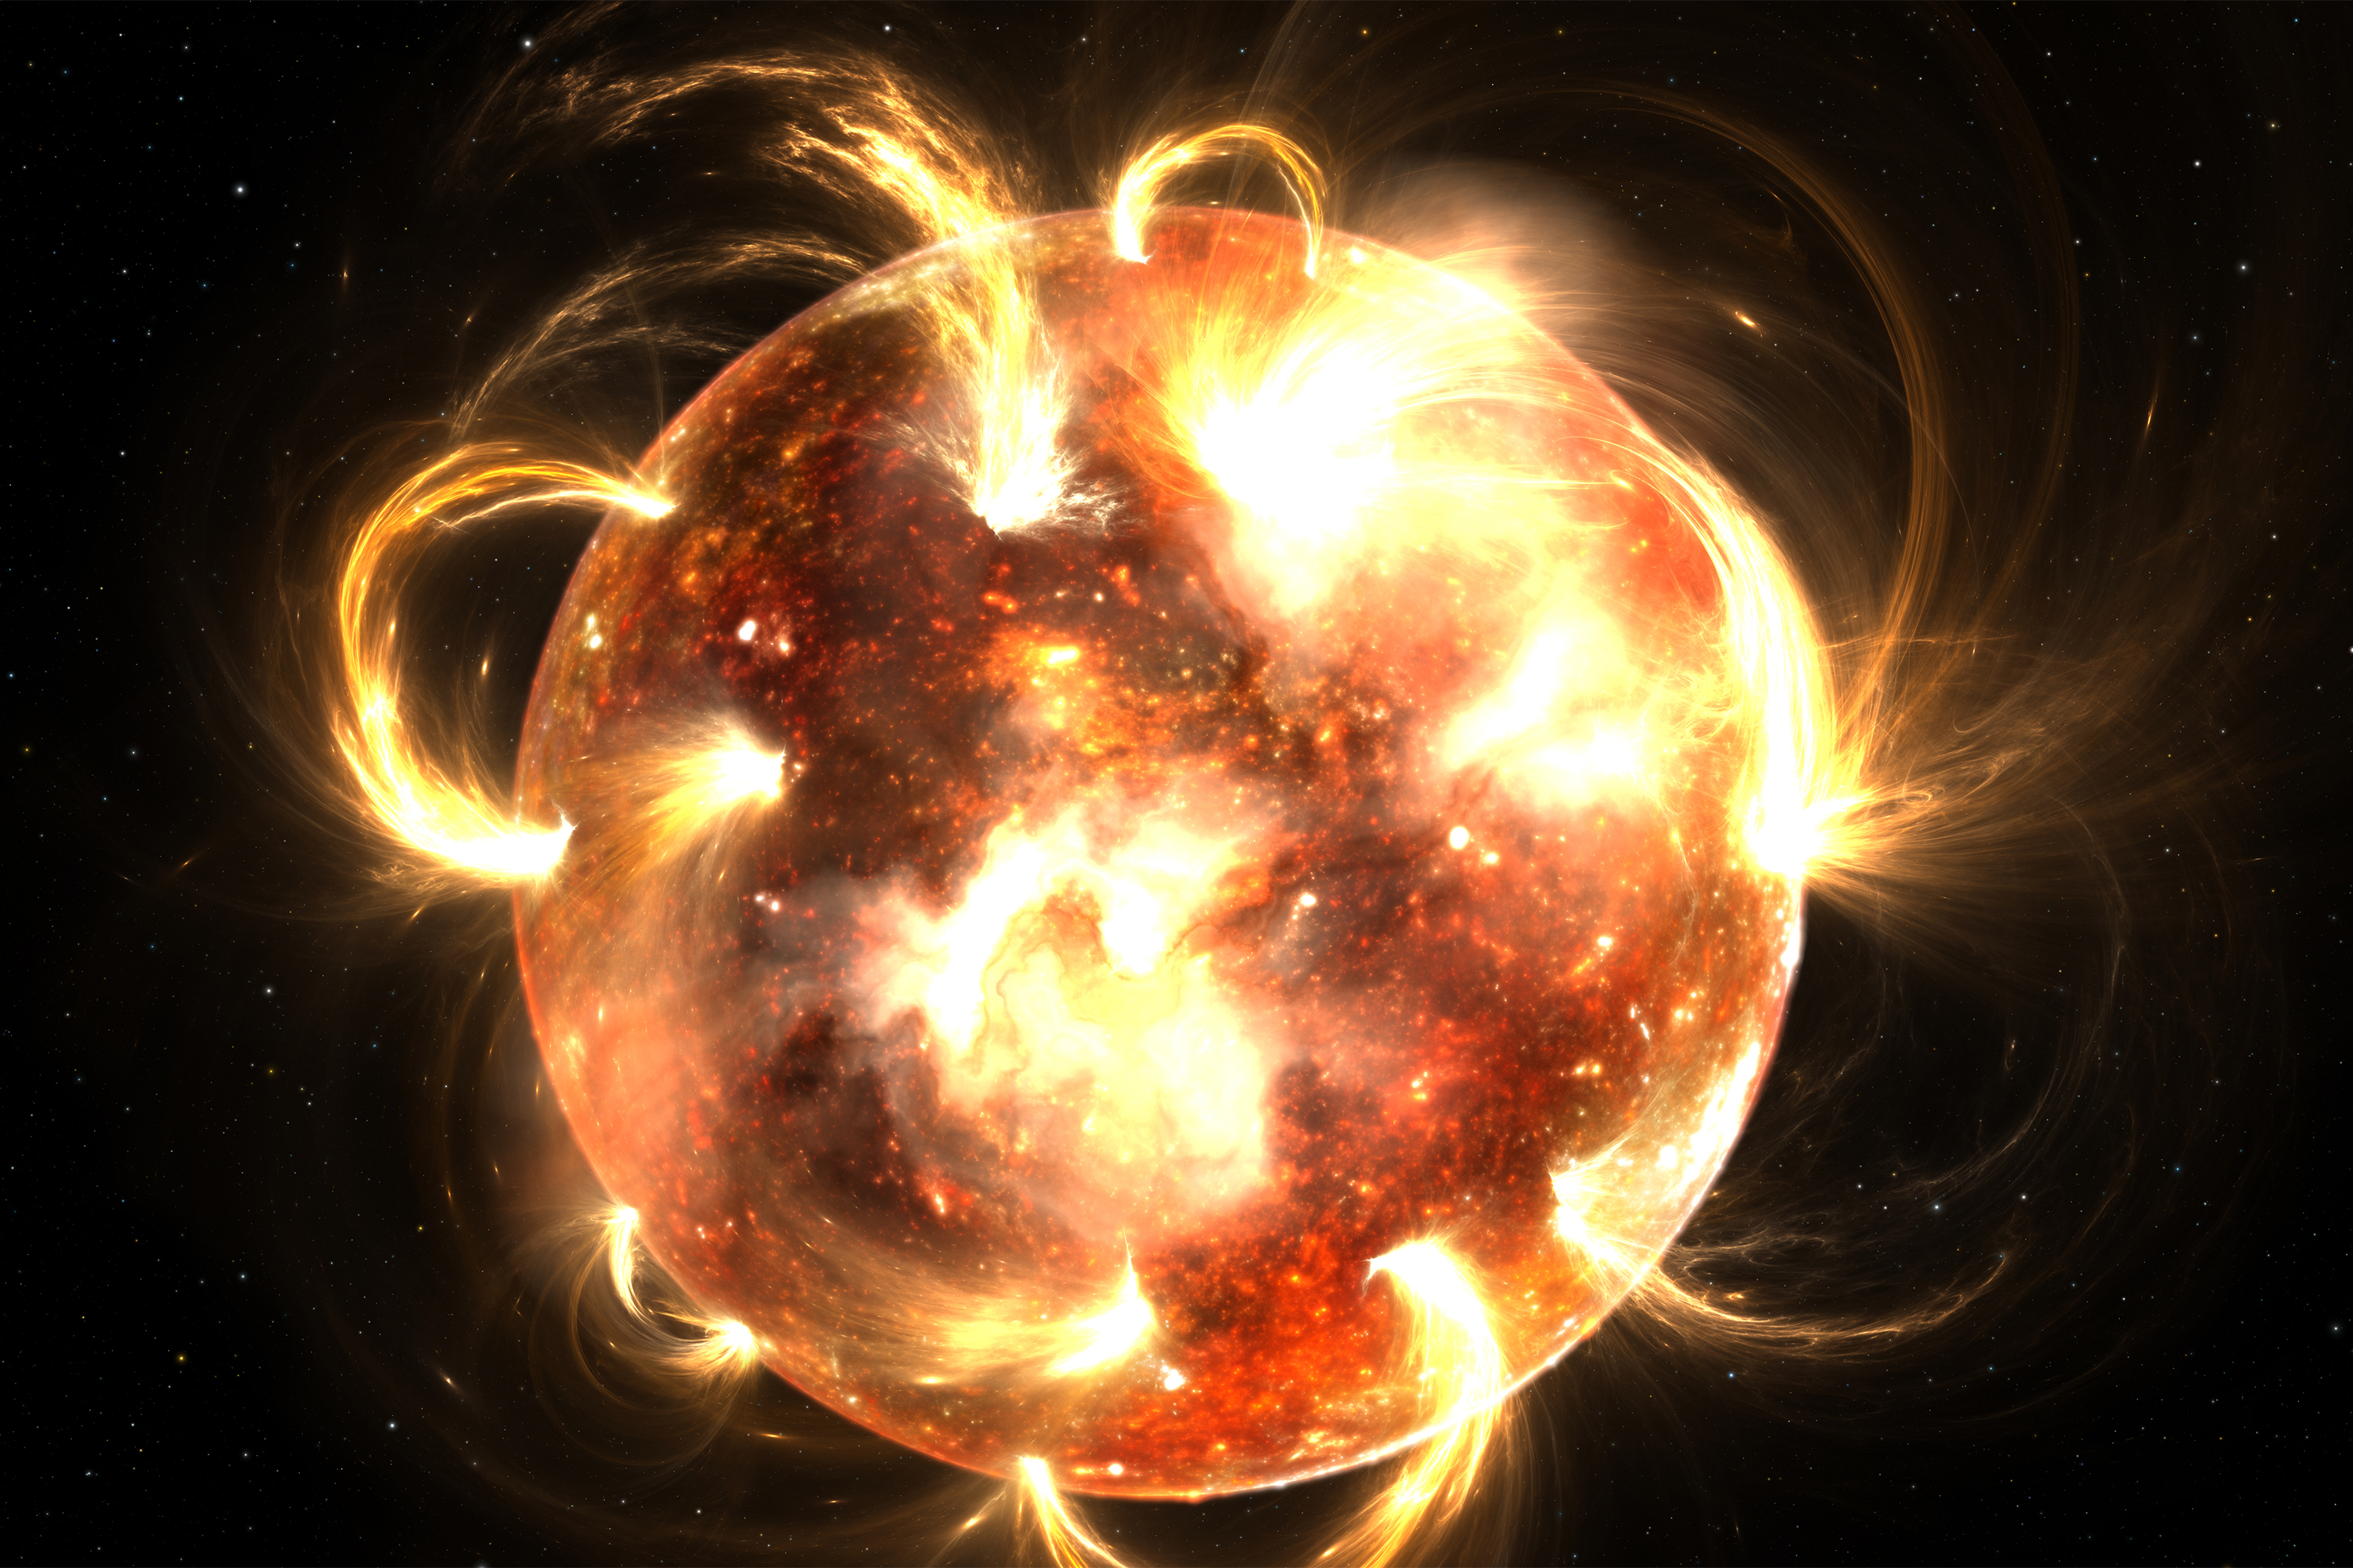 How solar flares affect us energetically and astrologically